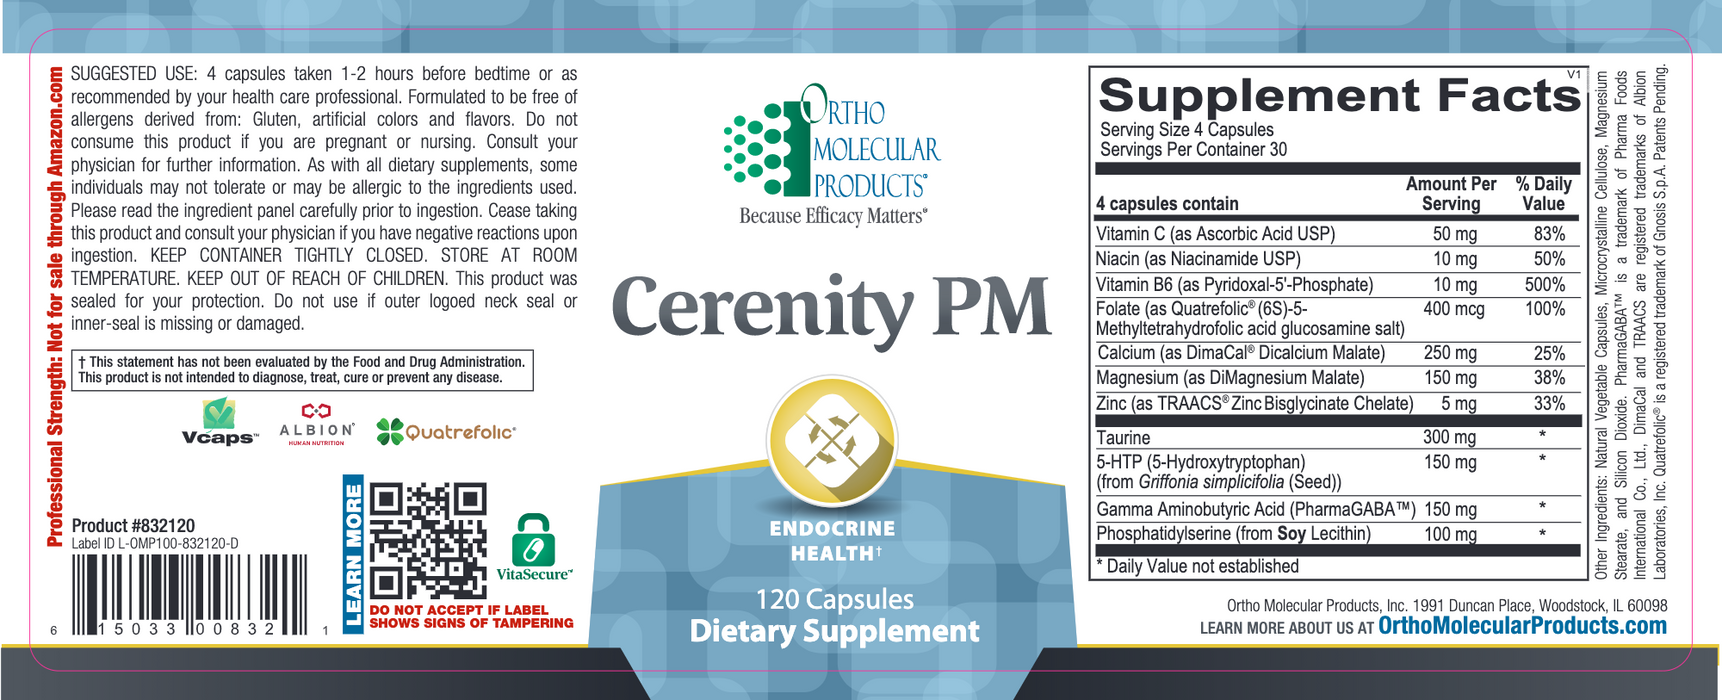 Cerenity PM-Ortho Molecular Products-60 Capsules-Pine Street Clinic